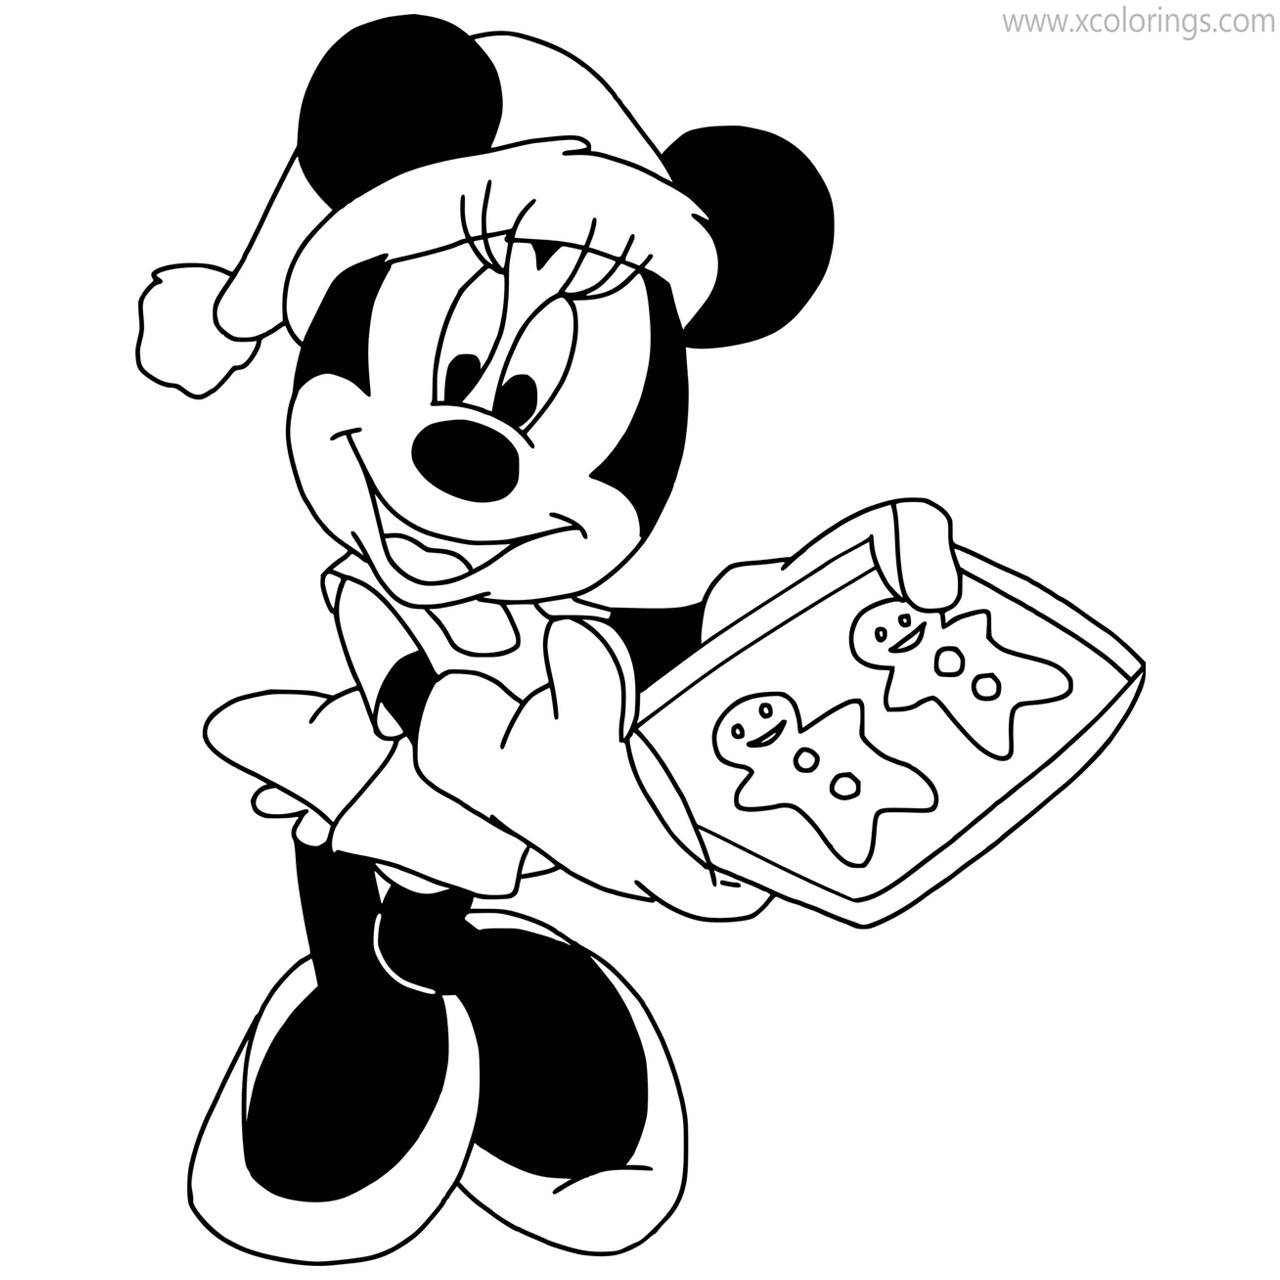 Free Minnie Mouse Christmas Gingerbread Coloring Pages printable